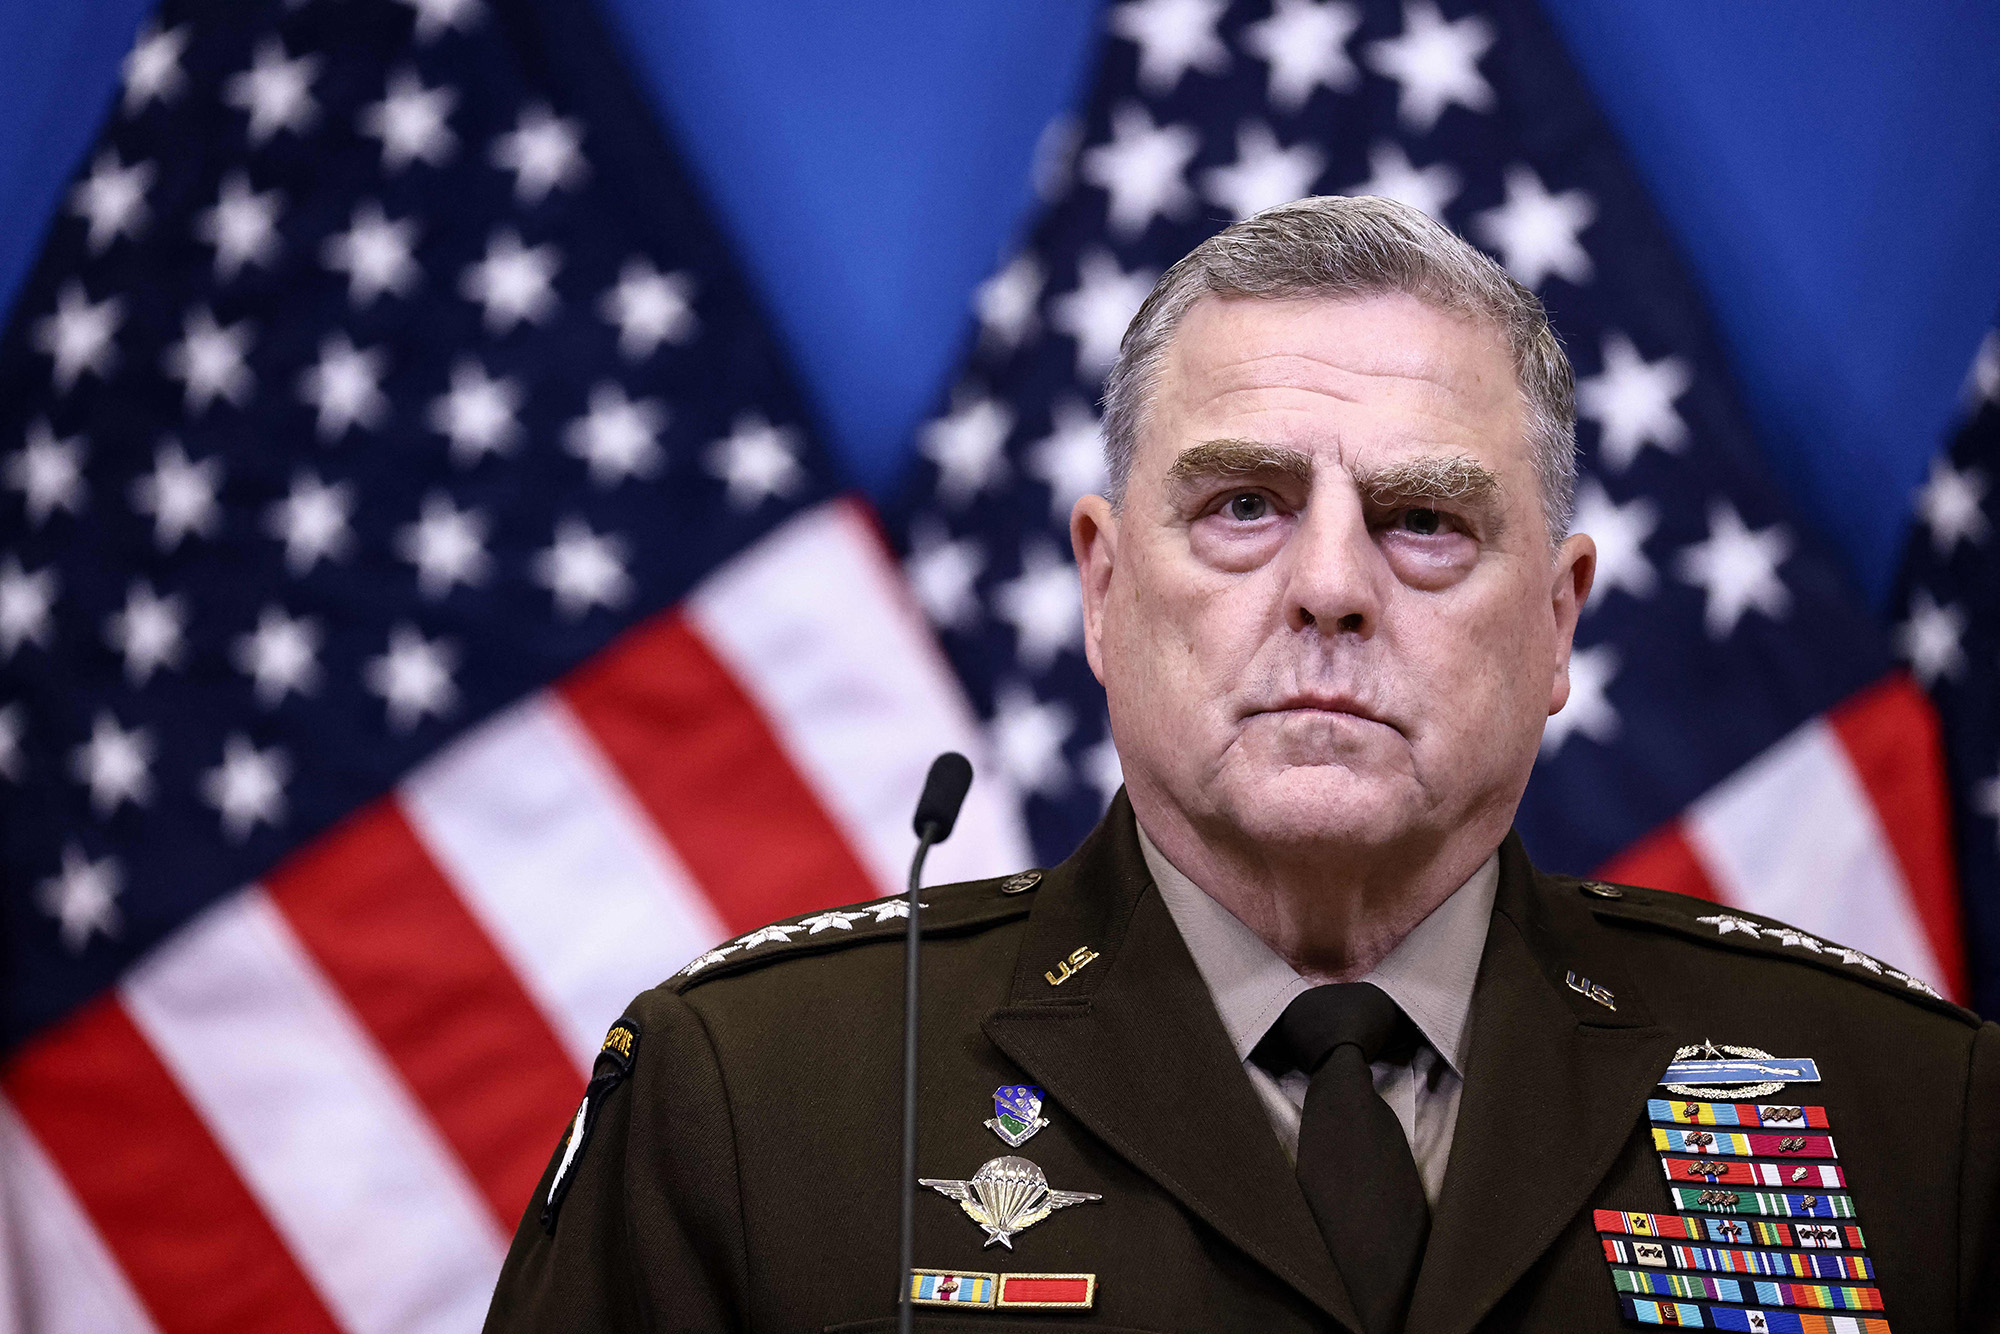 Chairman of the Joint Chiefs of Staff Mark Milley speaks during a press conference at the NATO Headquarter in Brussels on October 12.